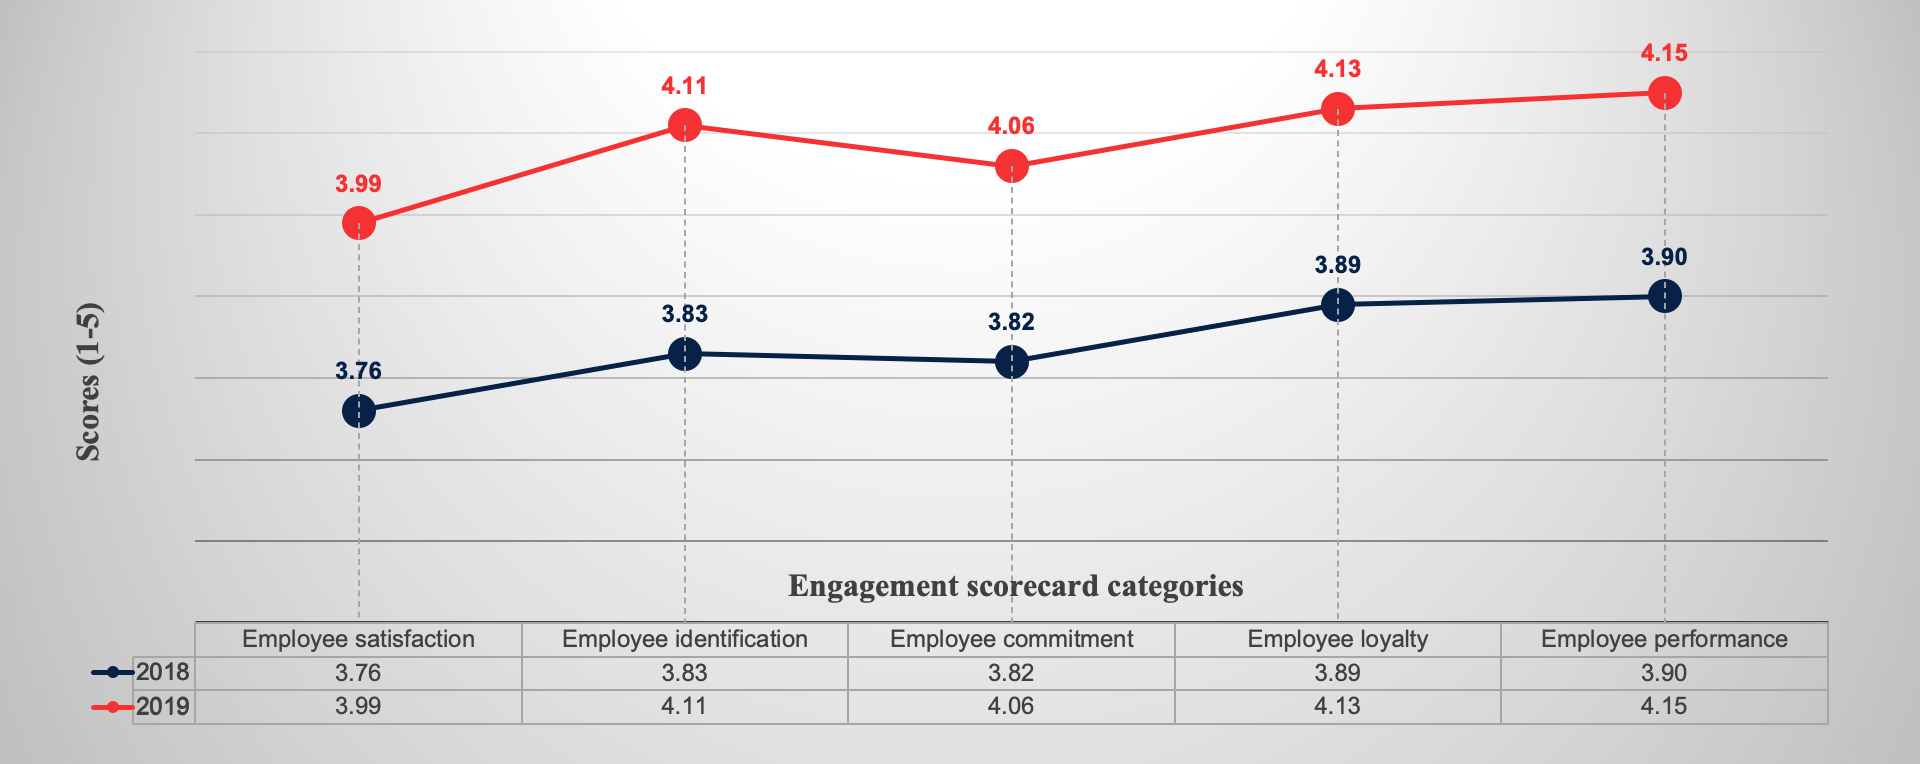 graph of employee engagement scores for different categories